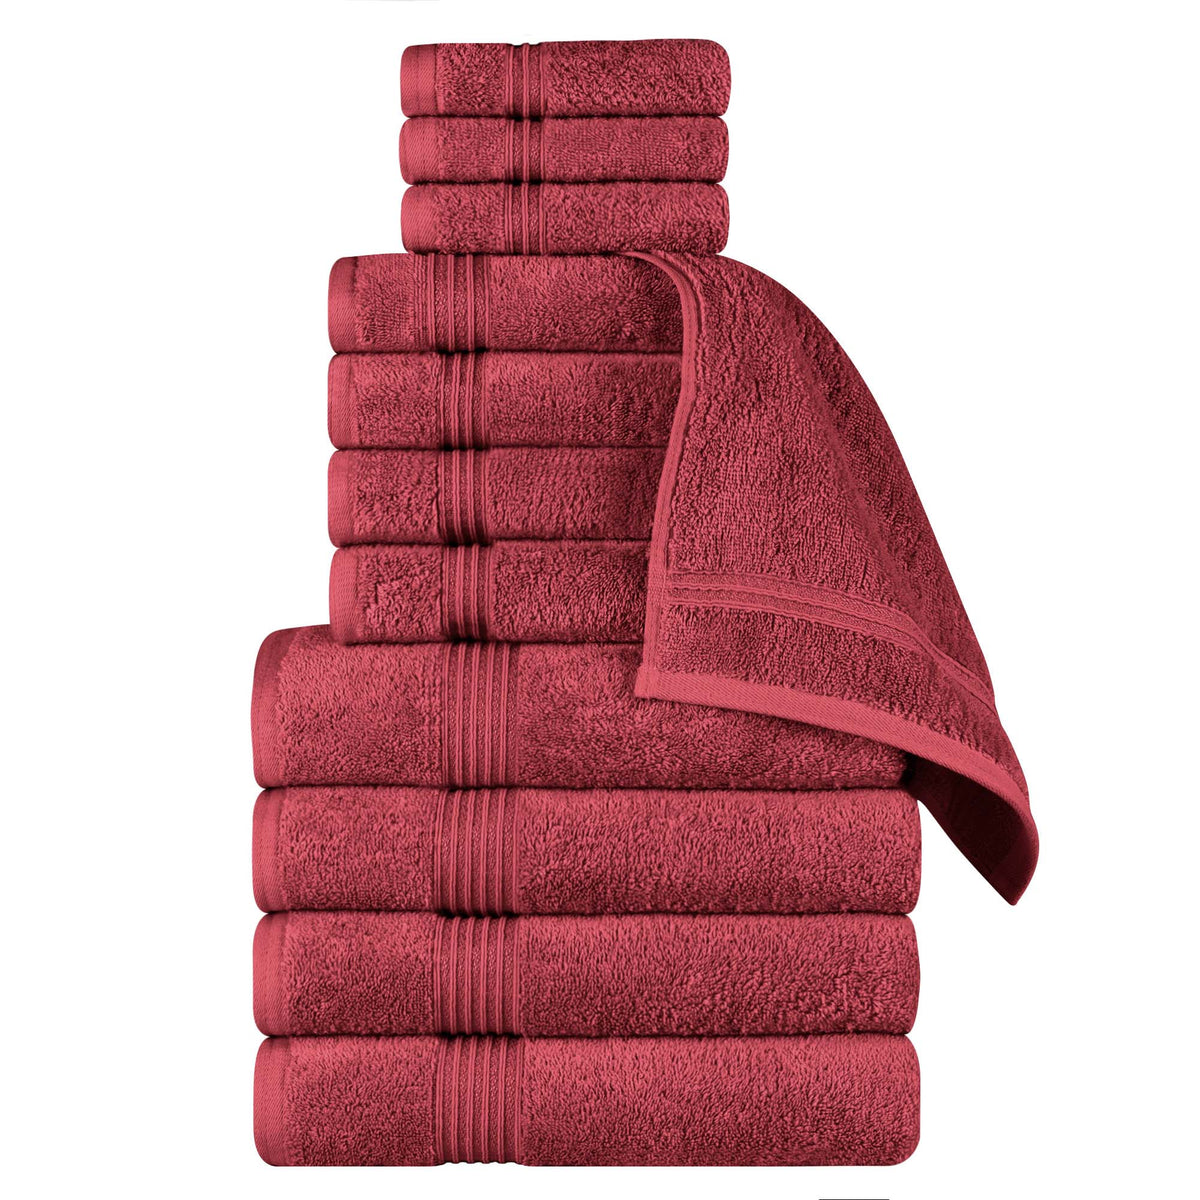 Egyptian Cotton Highly Absorbent Solid 12 Piece Ultra Soft Towel Set - Burgundy